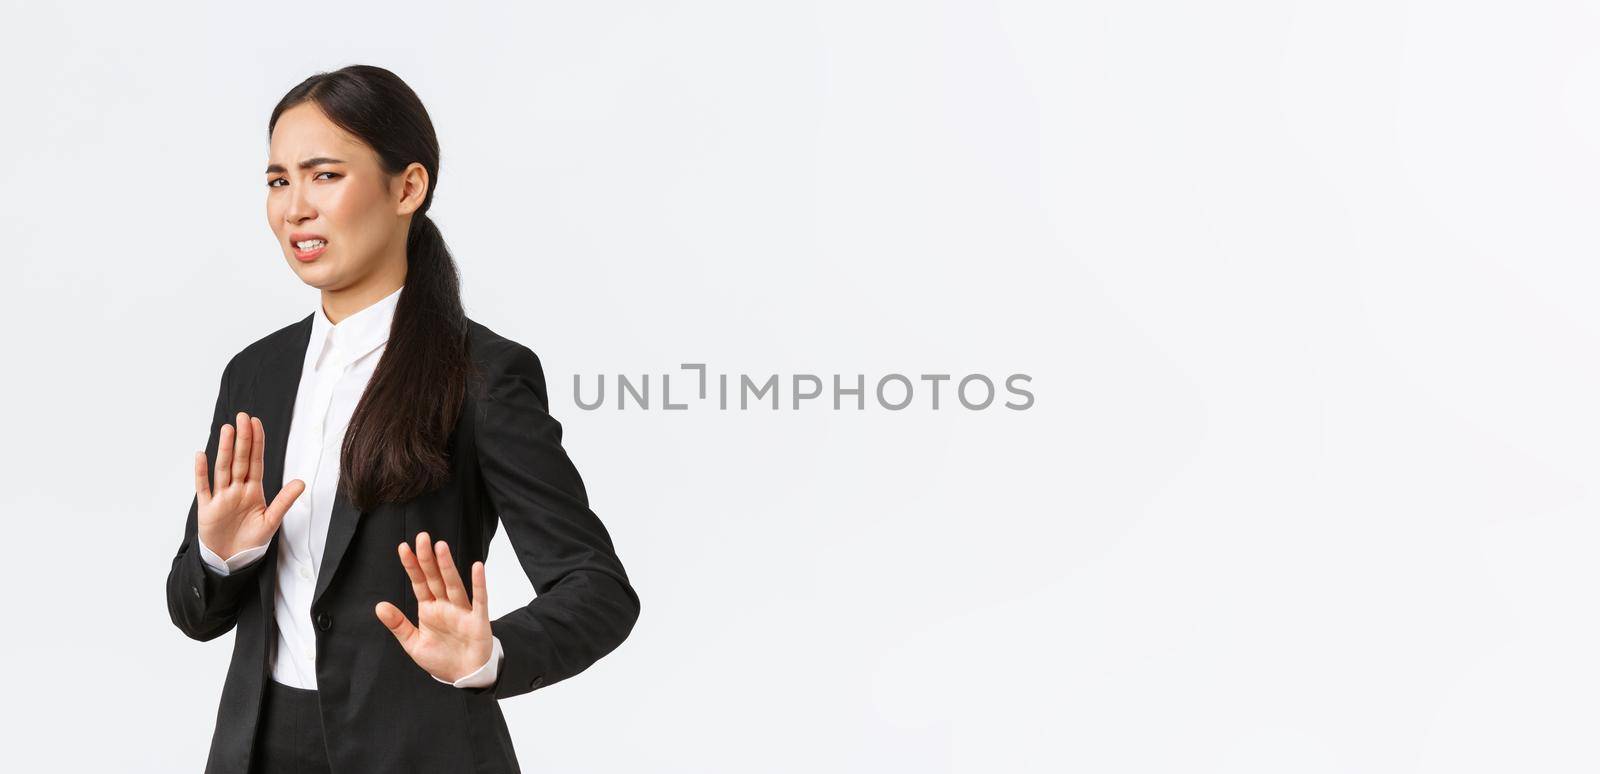 Displeased asian businesswoman avoiding risky suggestions, shaking hands in refusal, rejecting disgusting strange offer. Saleswoman grimacing from aversion and step away, white background.